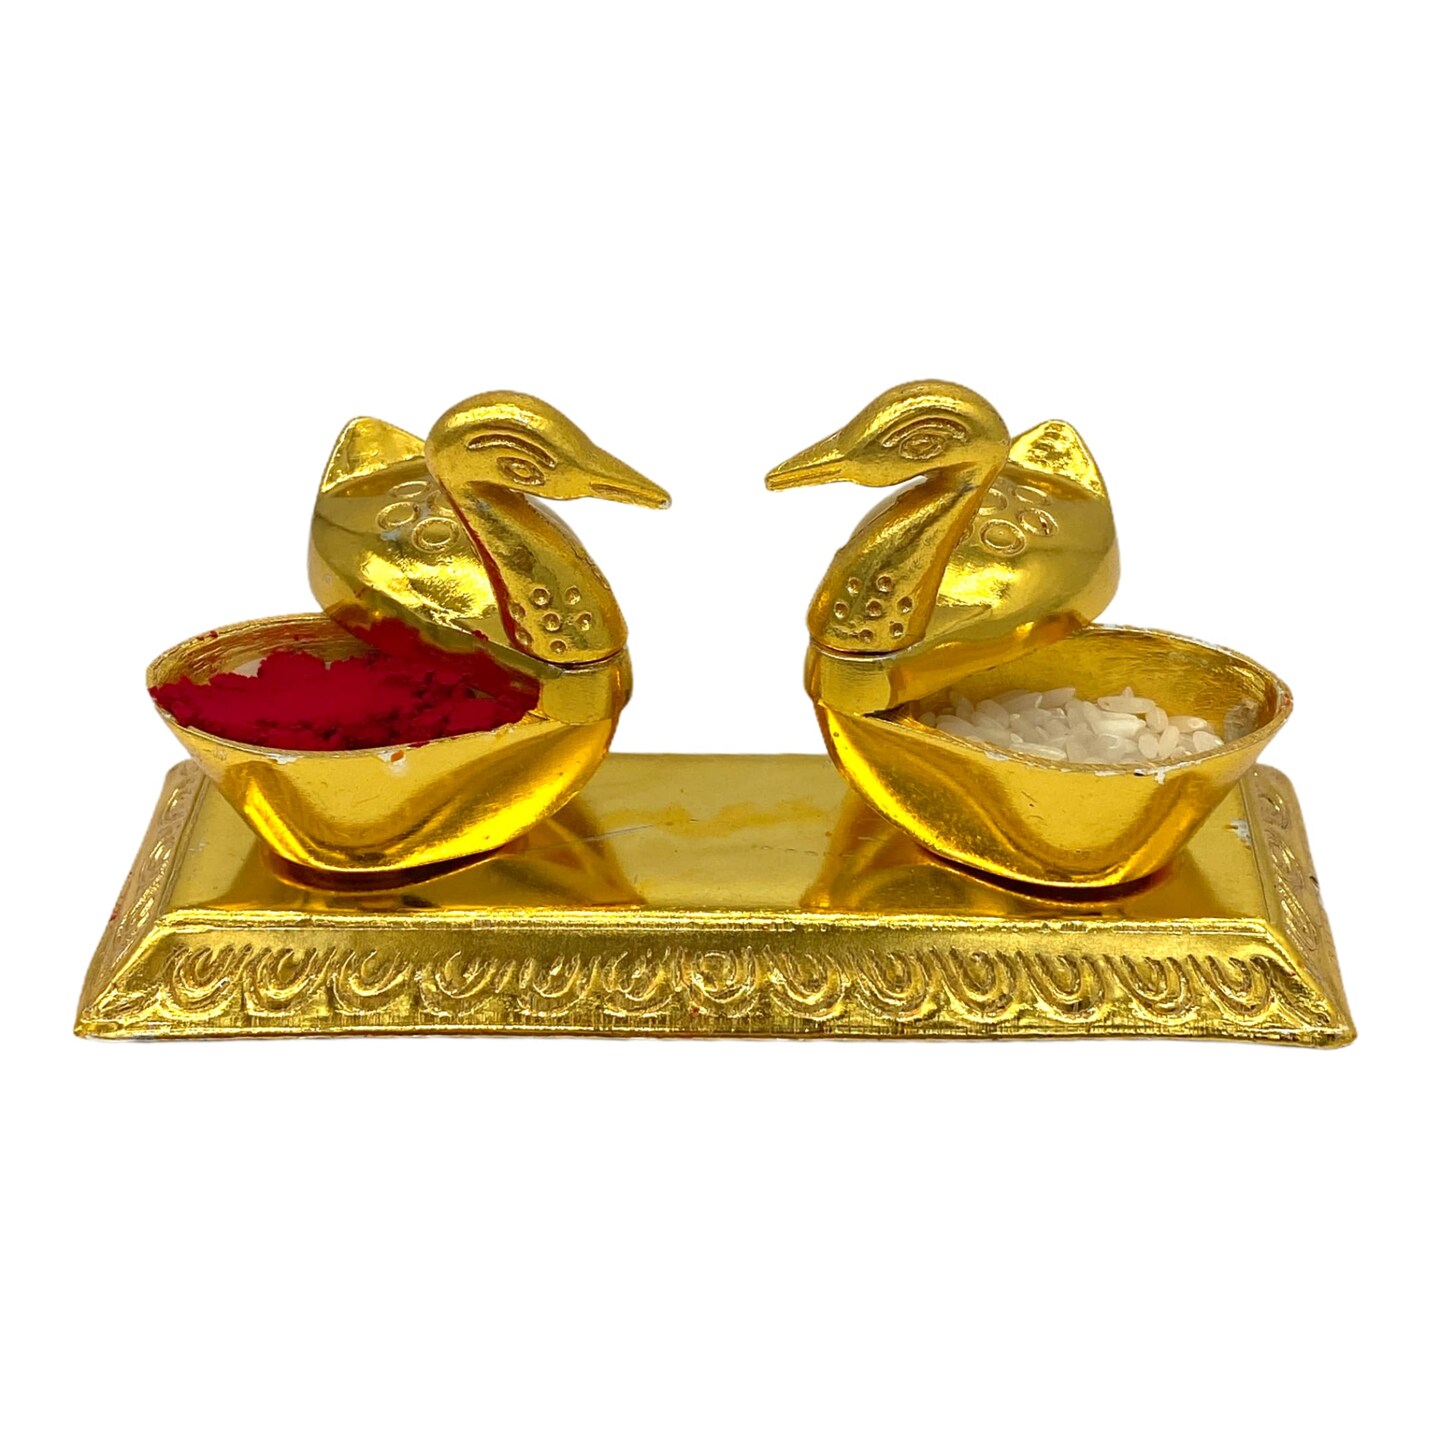 Diwali Gifts Same Day Delivery - Up to 20% OFF, FREE Shipping | Diwali gifts,  Online gifts, Gifts